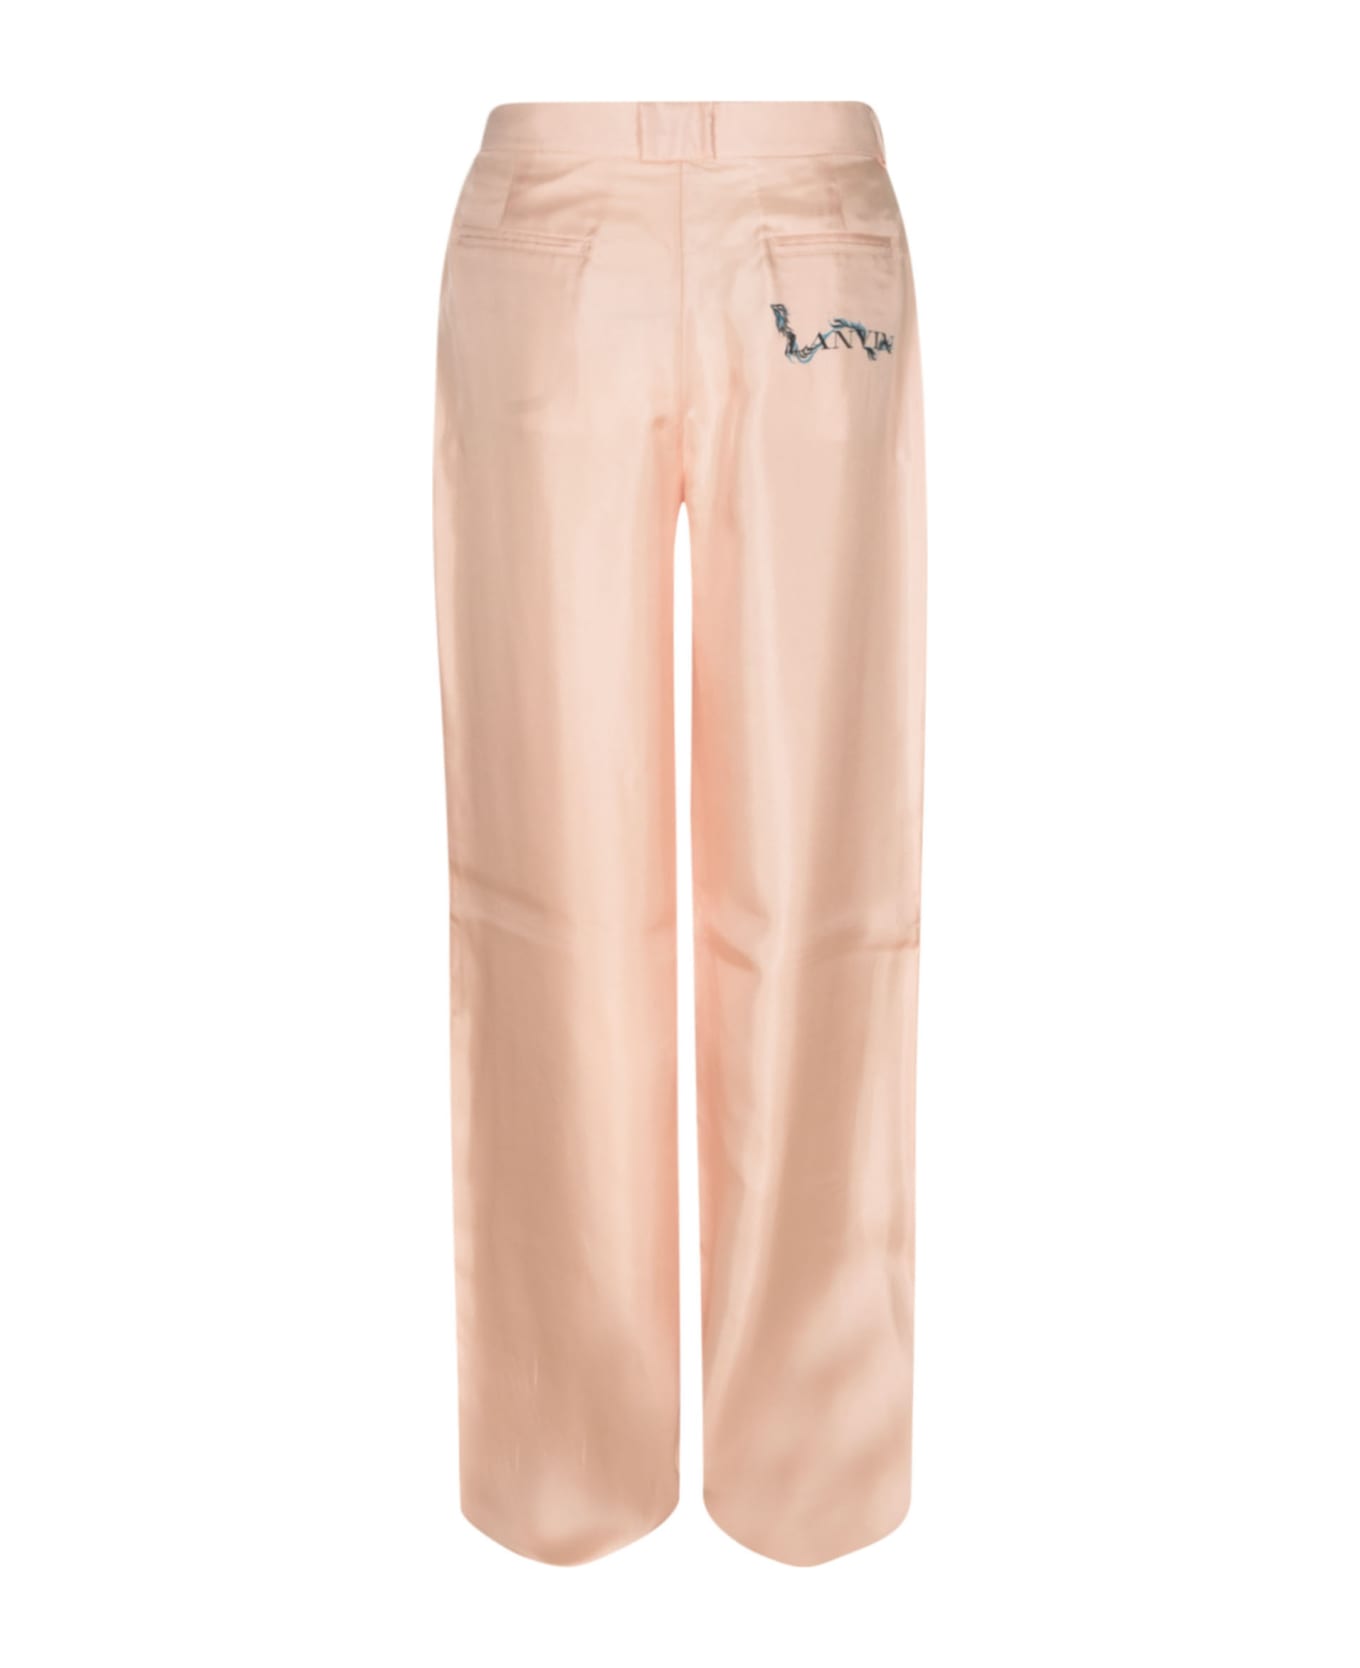 Lanvin High Waist Long Trousers - Pink ボトムス